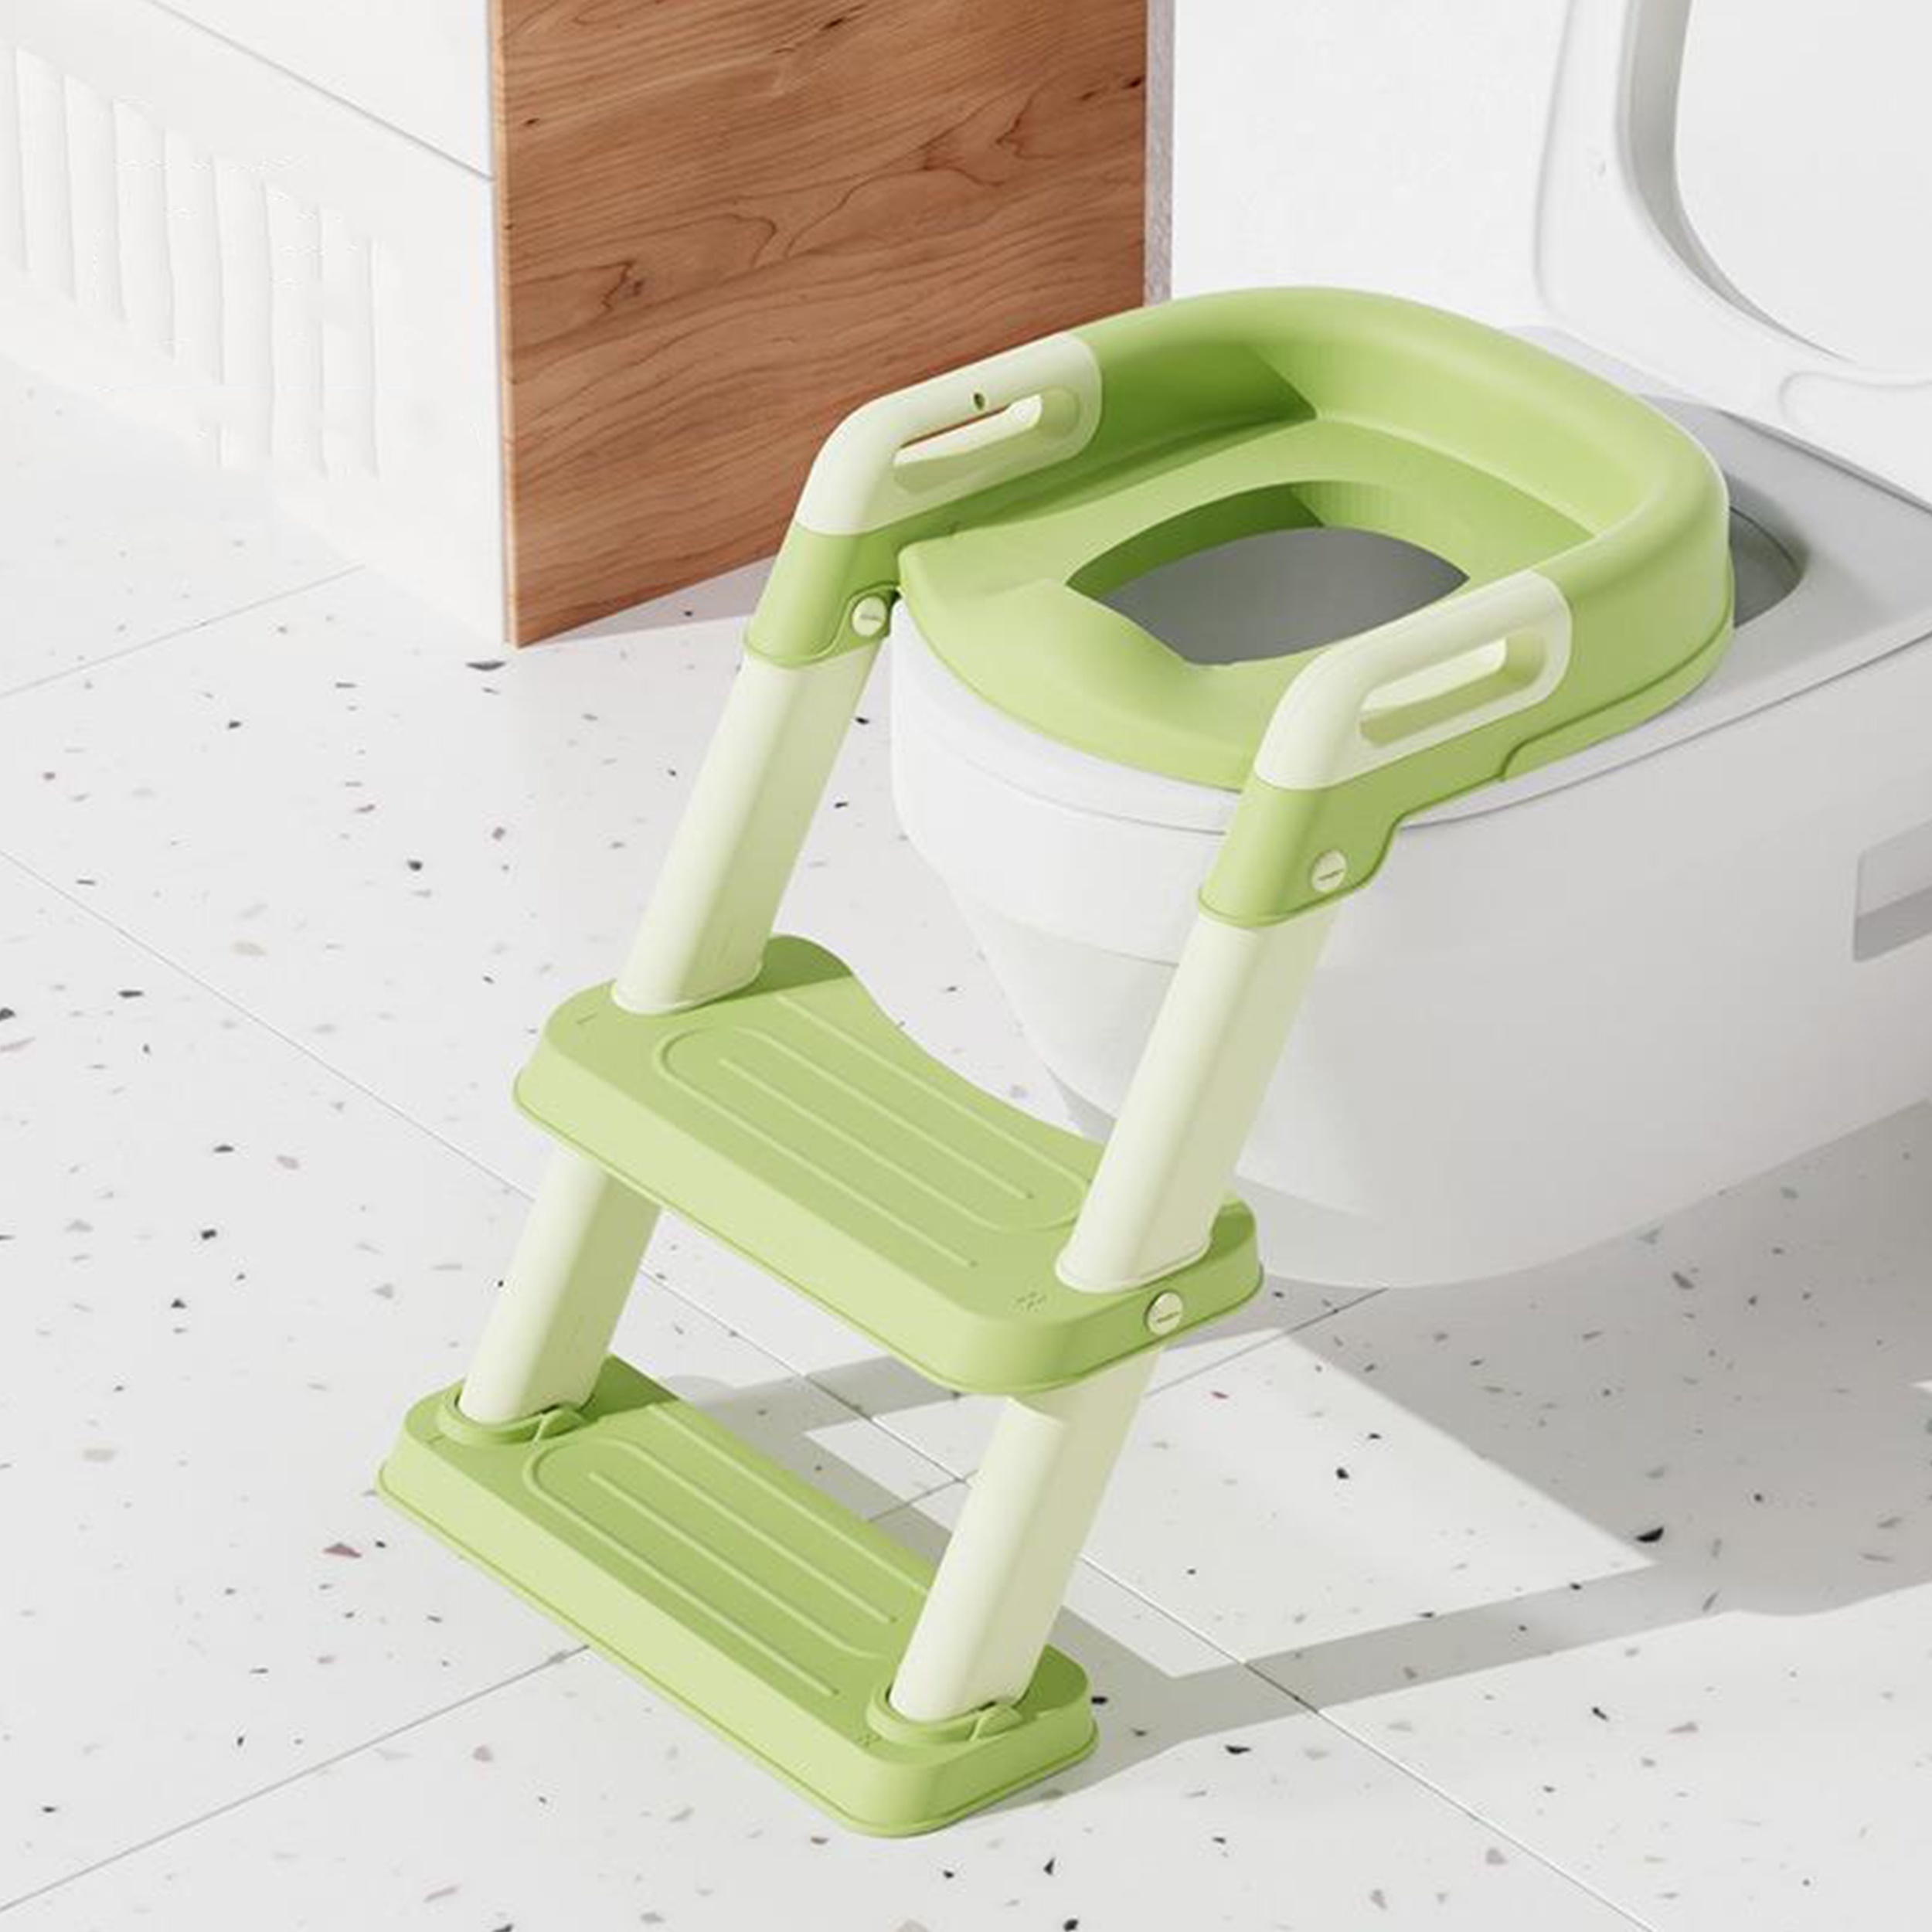 Buy Potty Training Toilet Seat with Step Stool Ladder for Boys and